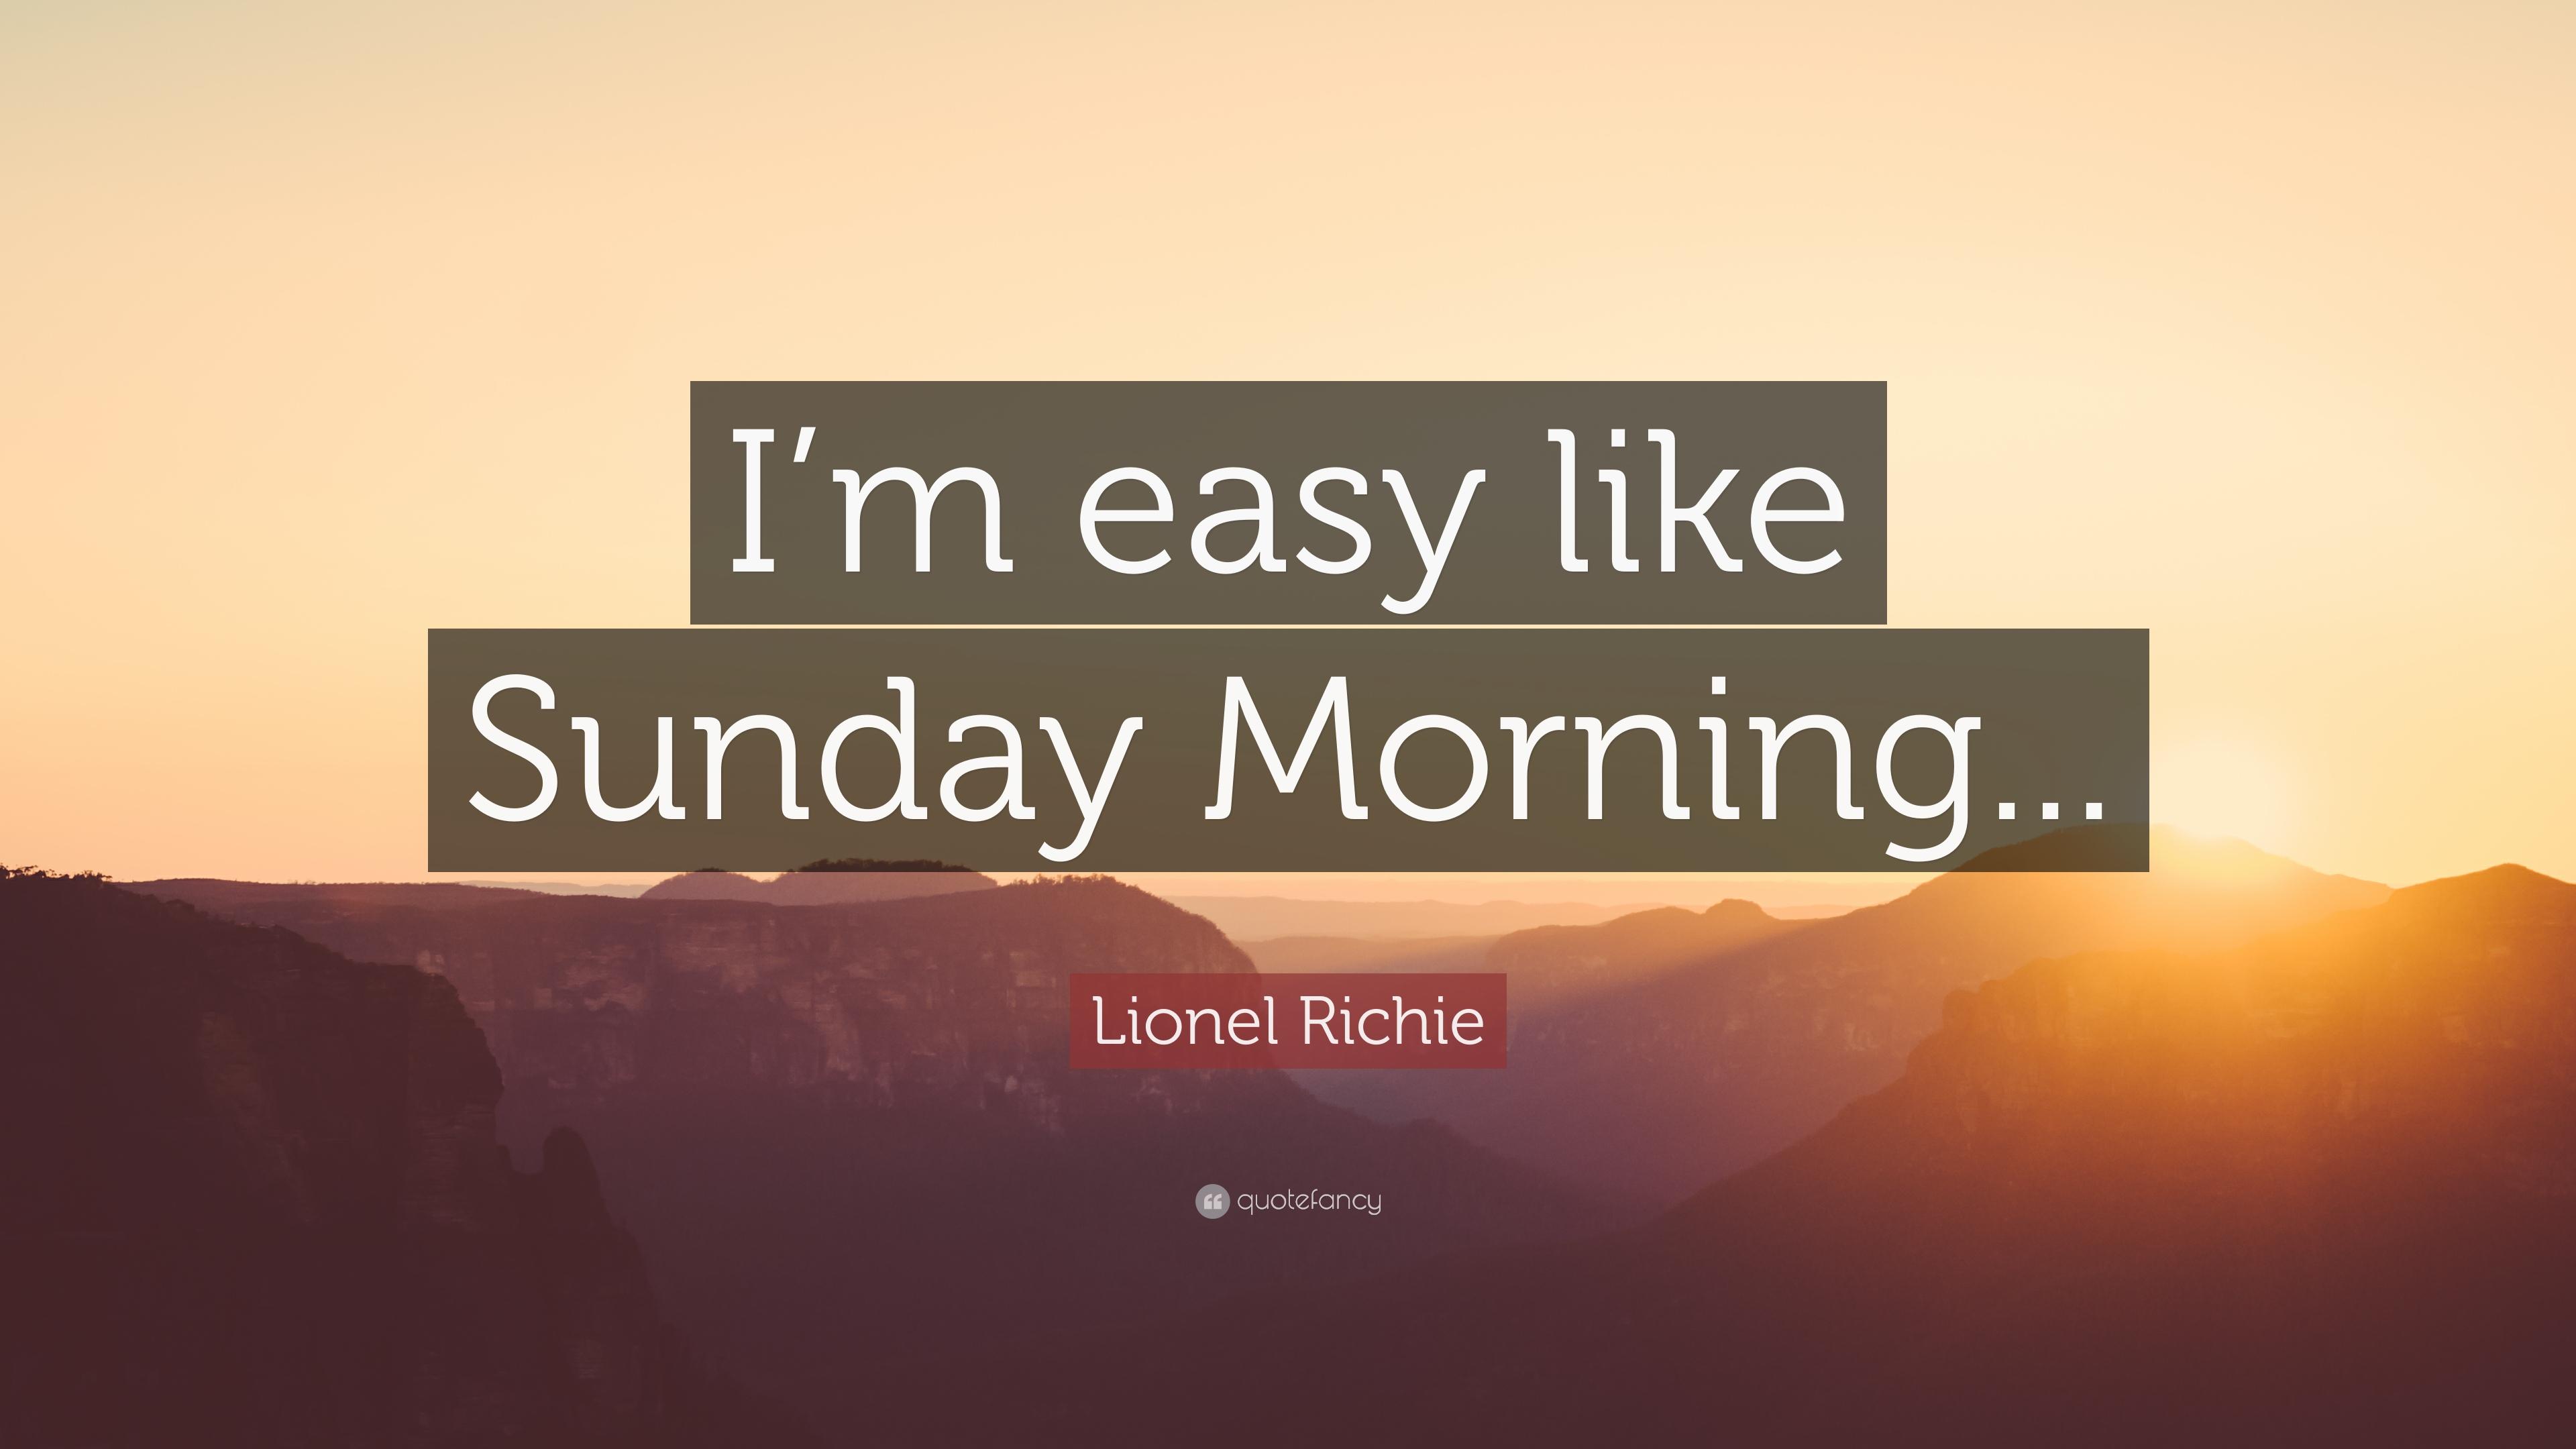 Lionel Richie Quote: “I'm easy like Sunday Morning.” 9 wallpaper